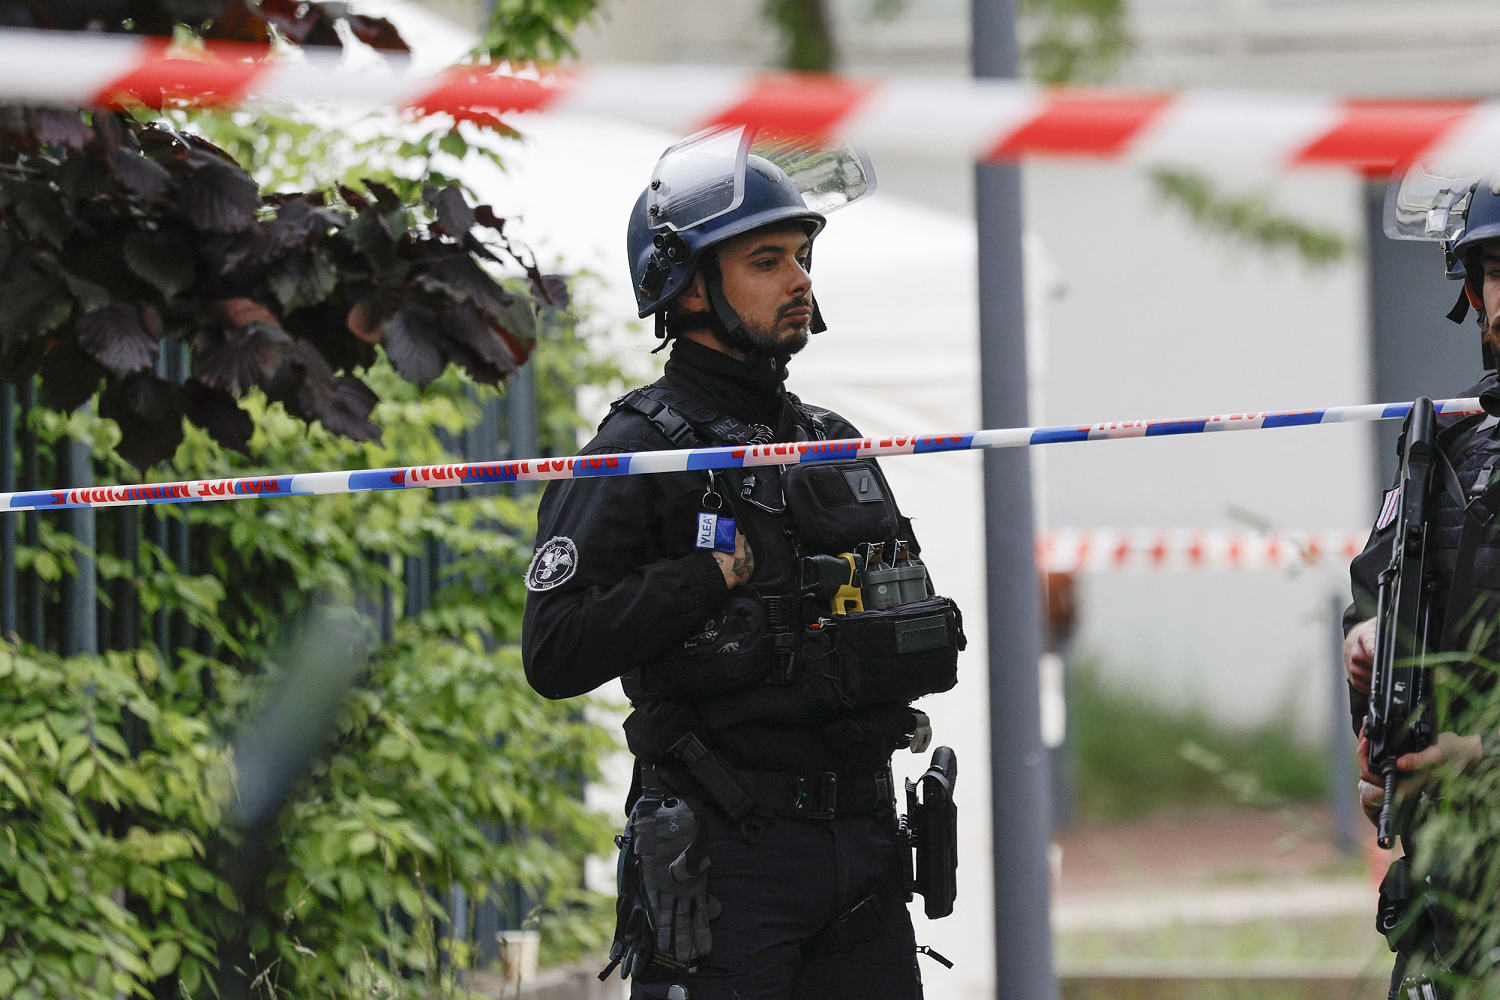 Police fatally shoot a man suspected of planning to set fire to a synagogue in Paris